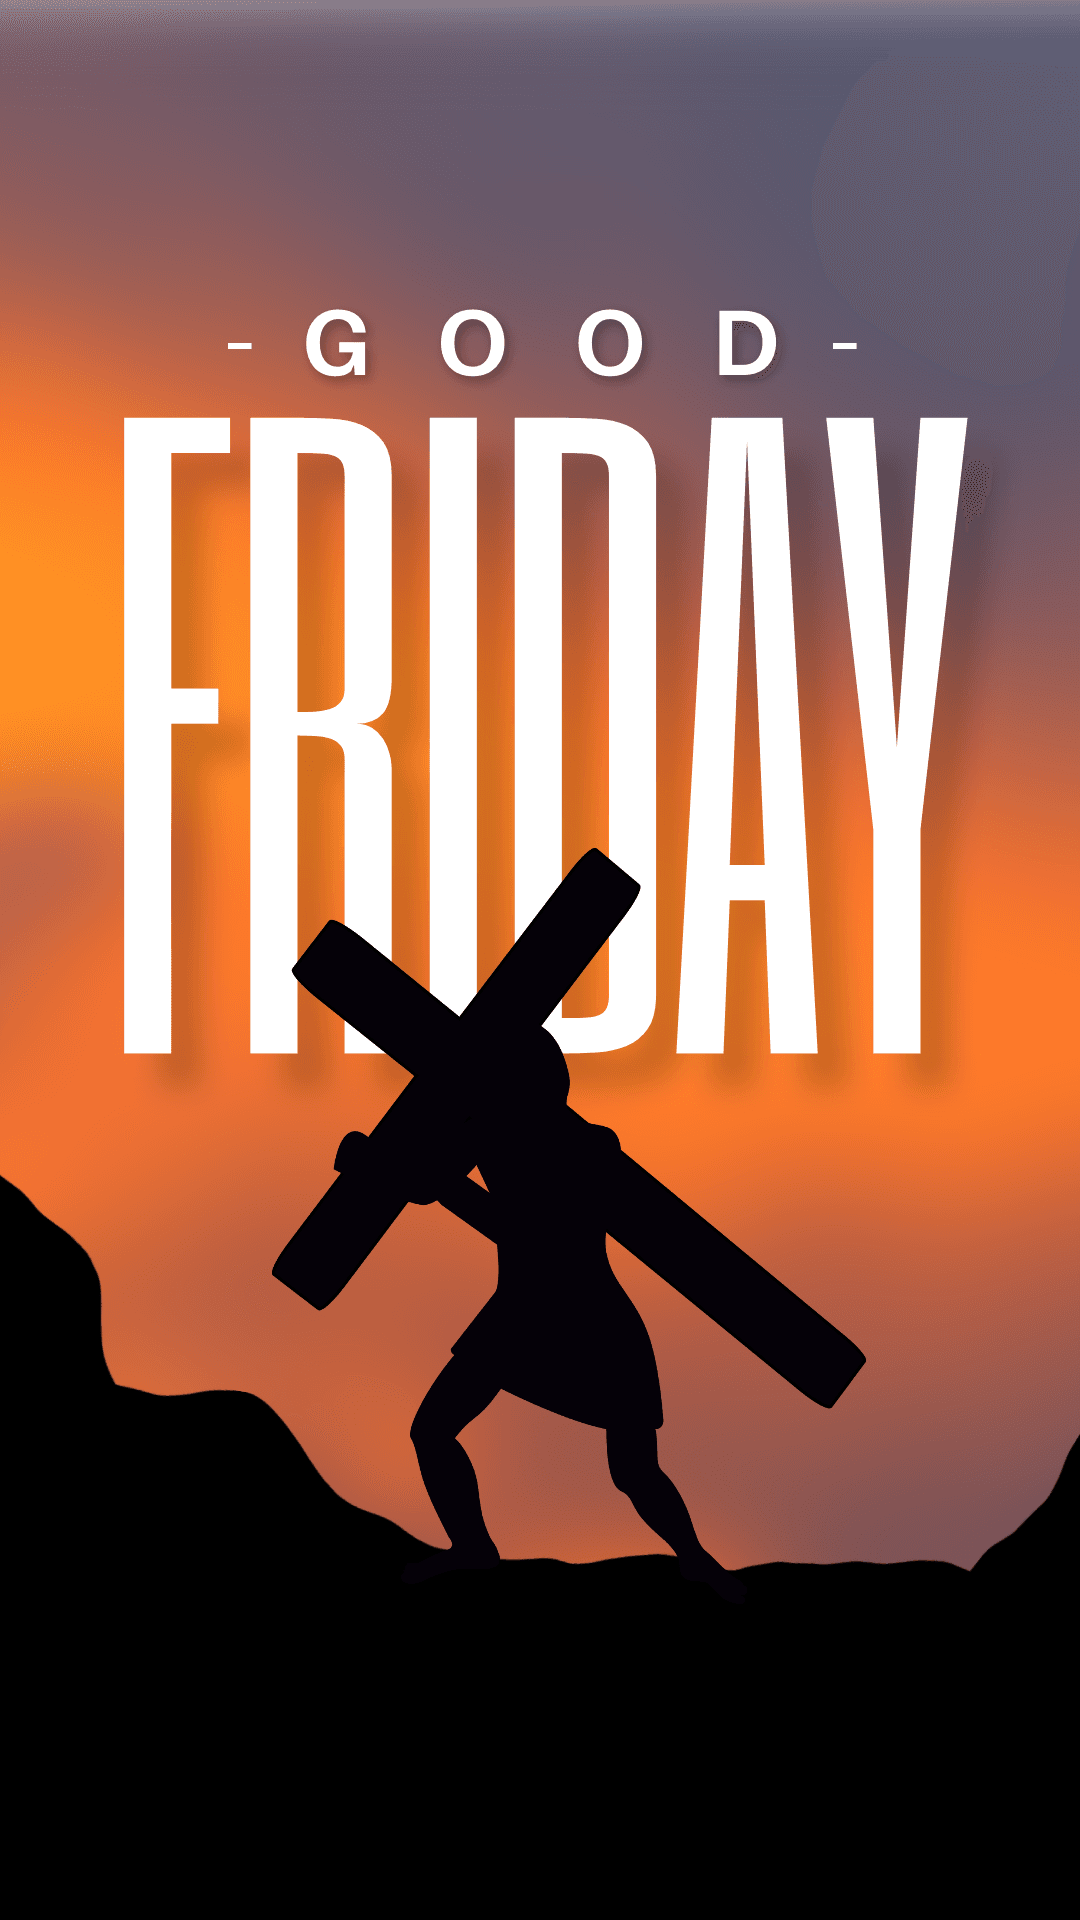 man-carrying-the-cross-good-friday-facebook-story-template-thumbnail-img